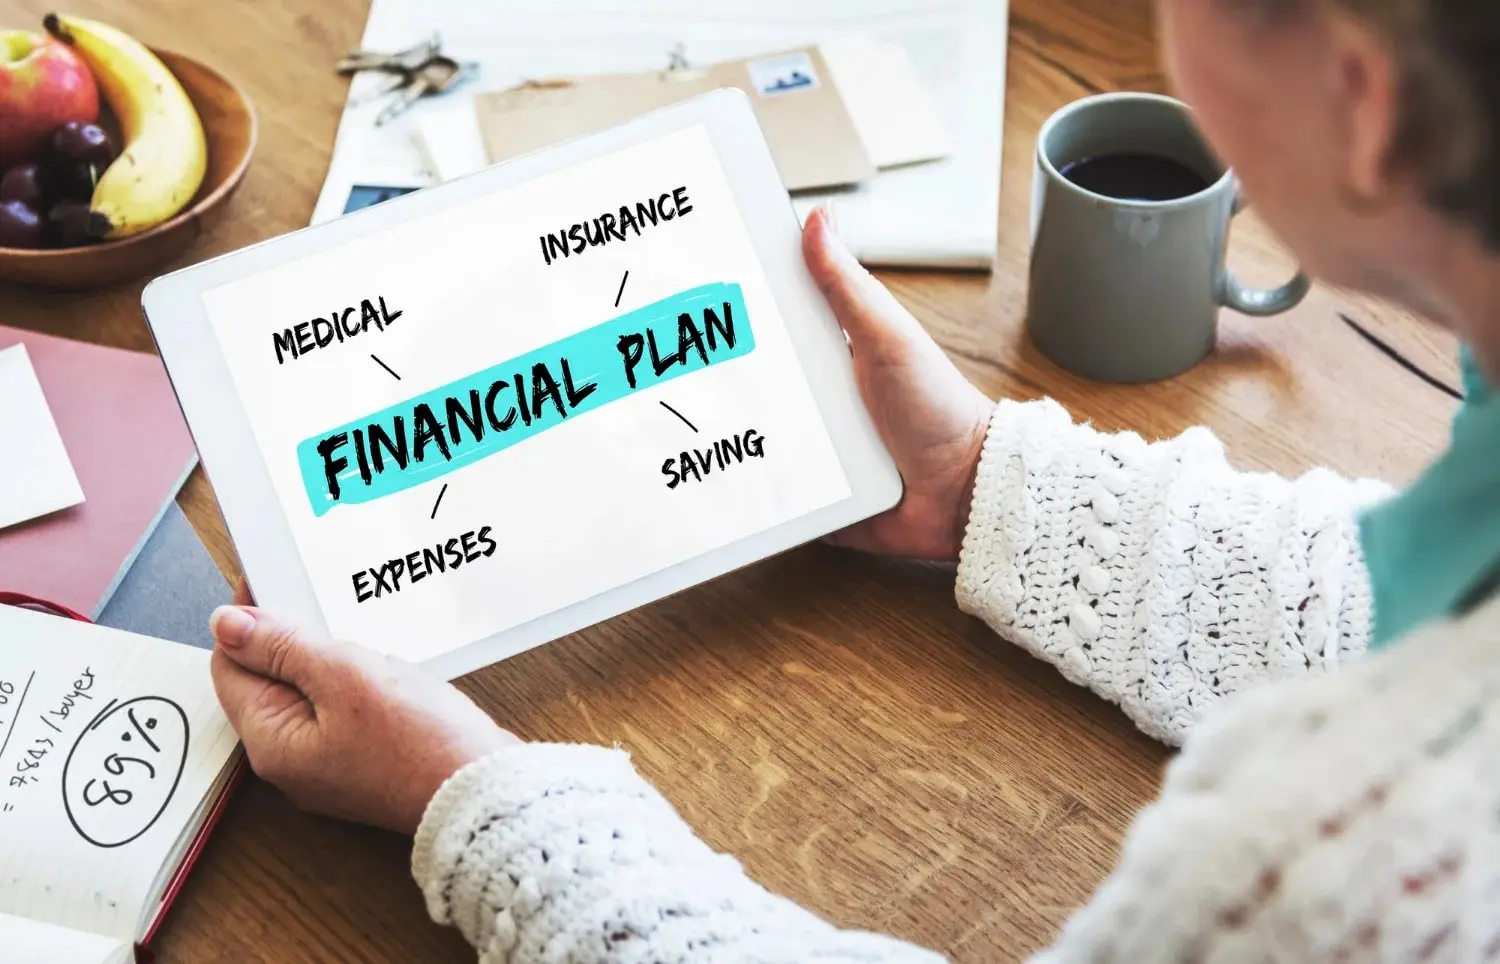 Unlock the secrets of wealth planning with our five-step guide. Take control of your financial future and achieve lasting prosperity! 💰 #WealthPlanning #FinancialSuccess"